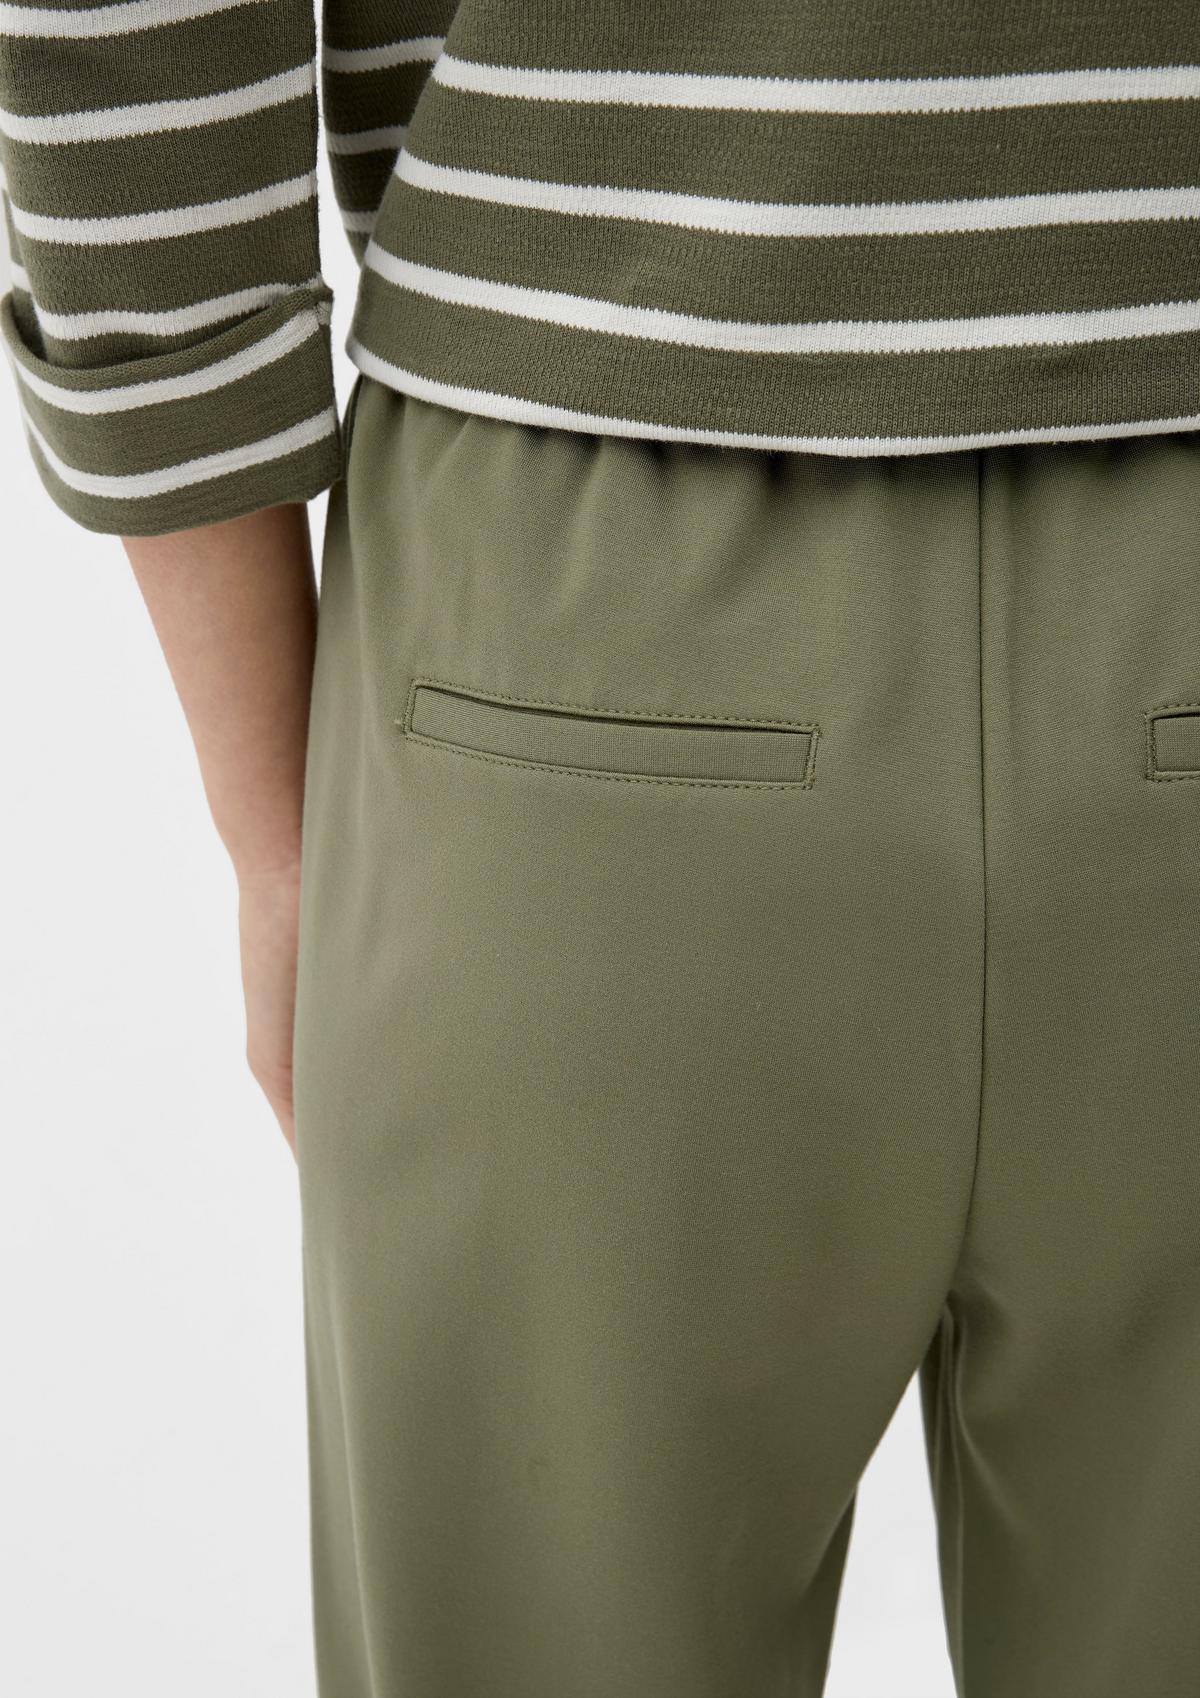 s.Oliver Tracksuit bottoms with an elasticated waistband